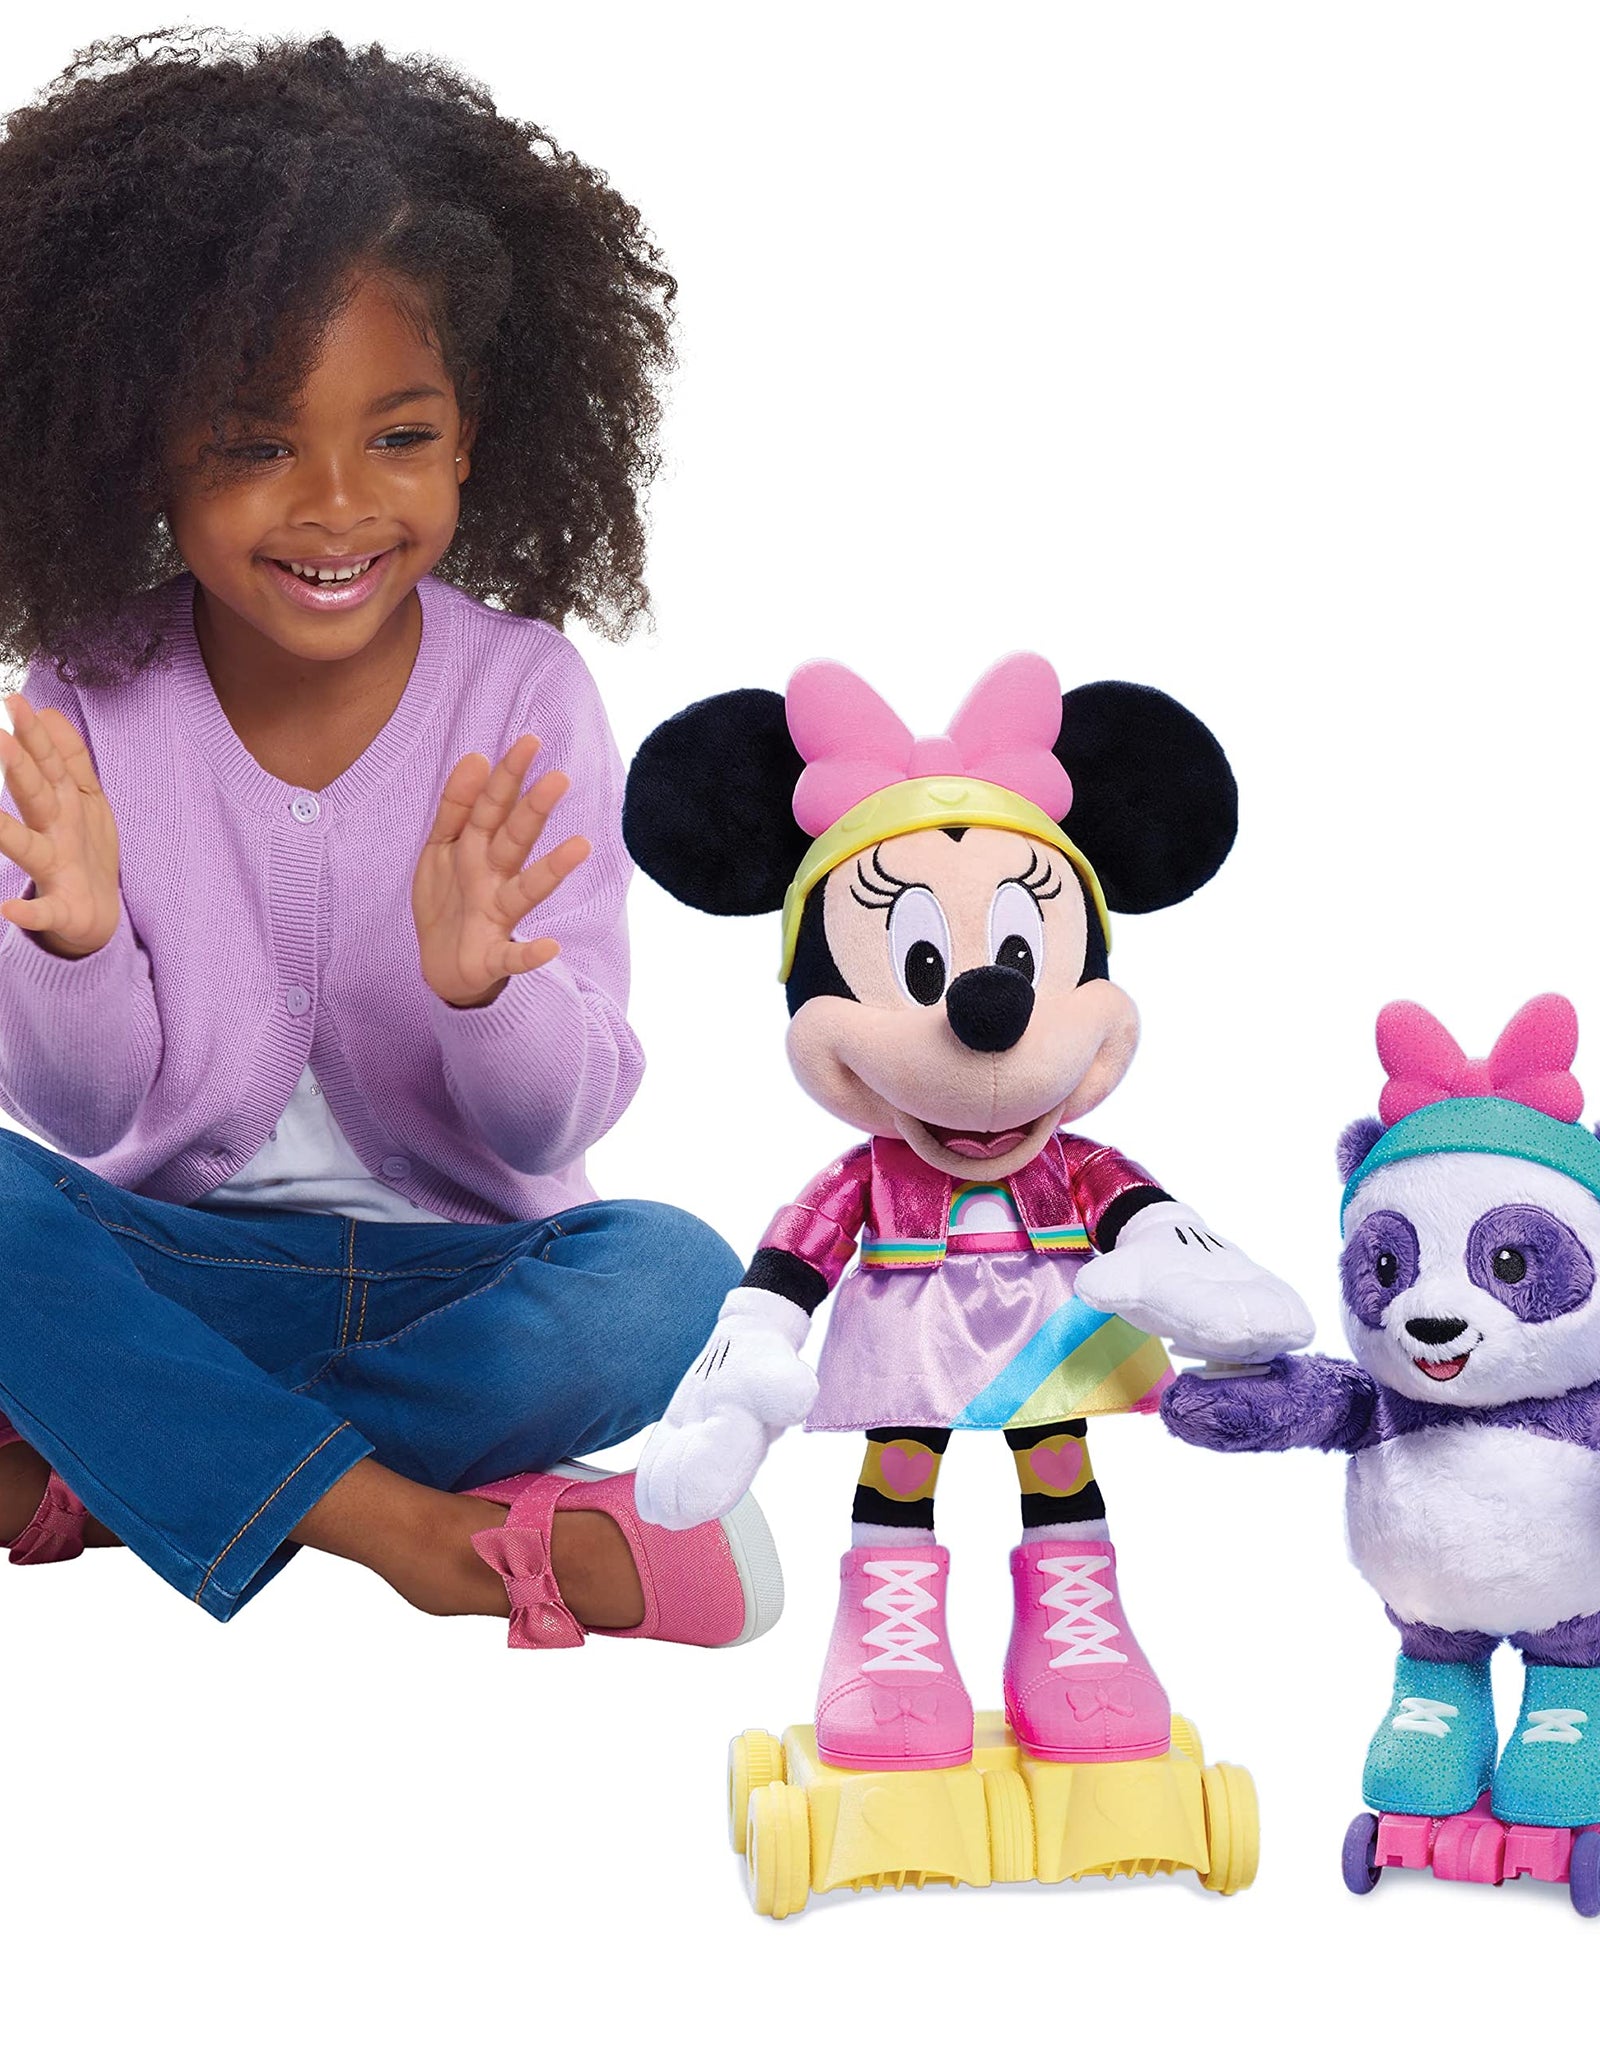 Disney Junior Minnie Mouse Roller-Skating Party Minnie Mouse, Interactive Light Up Feature Plush with Talking, Singing, and Moving, Includes a Roller-Skating Panda, by Just Play